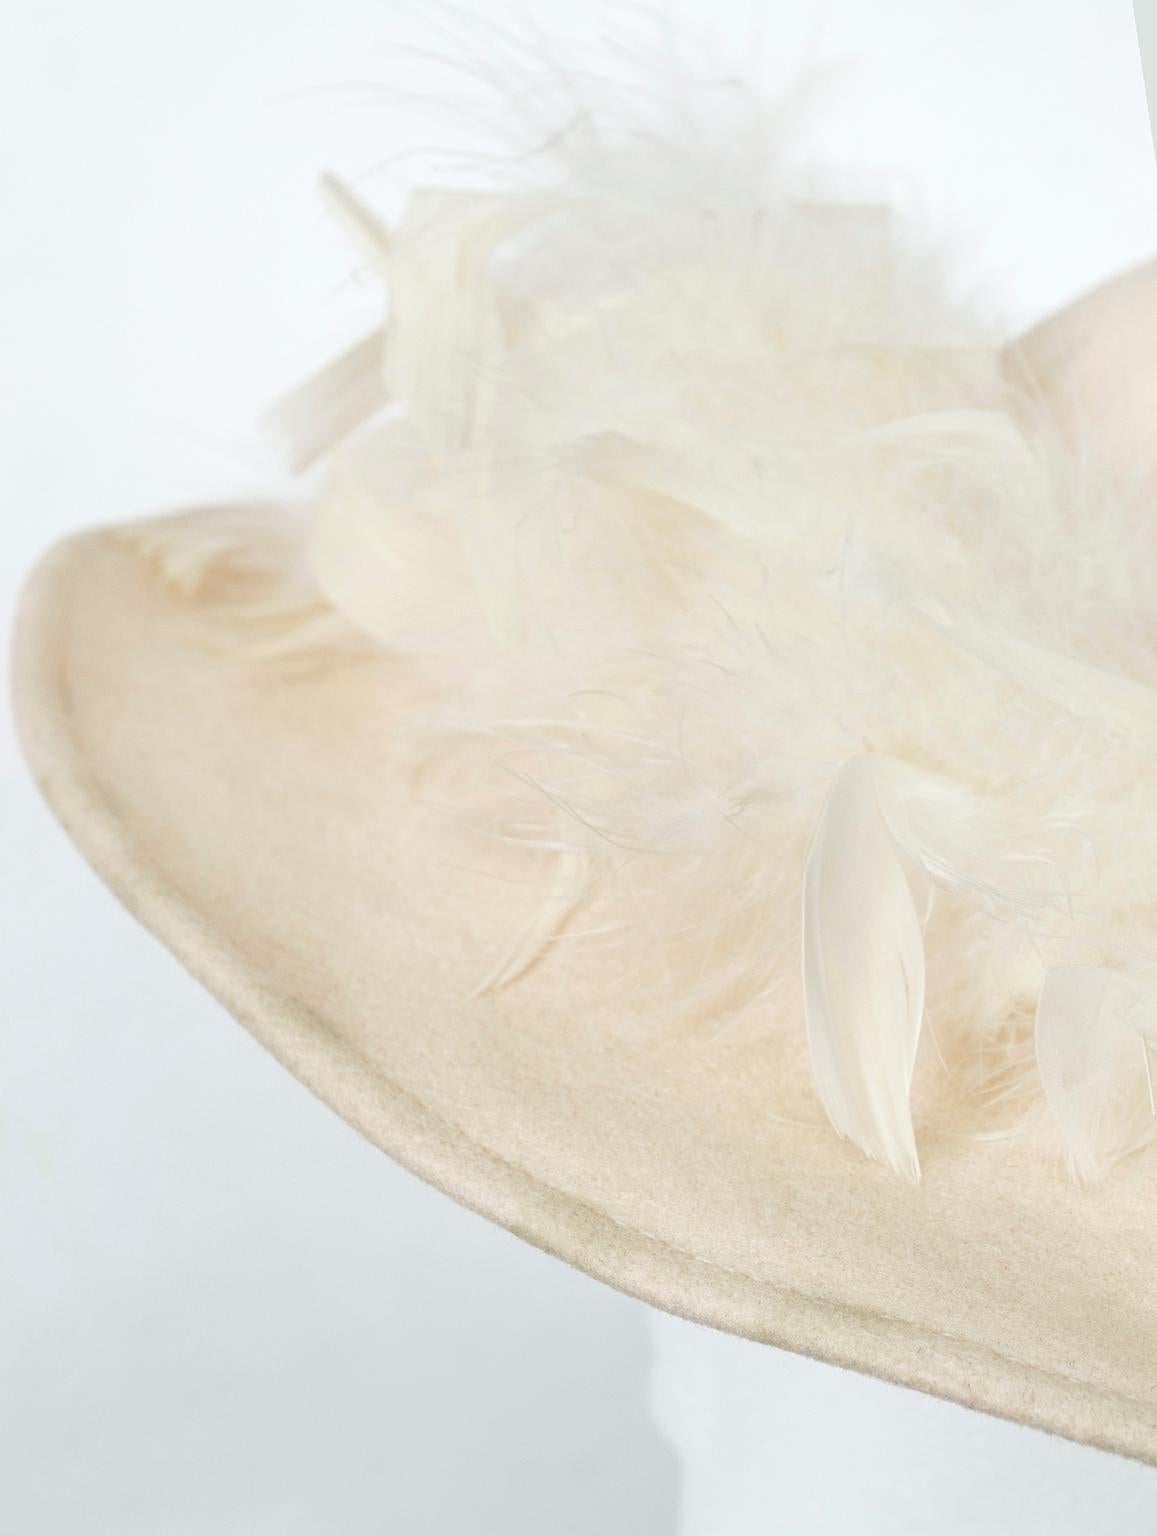 Beige Bollman Co. Ivory Boho Greenwich Floppy Hat with Ostrich Feather Band – M, 1970s For Sale